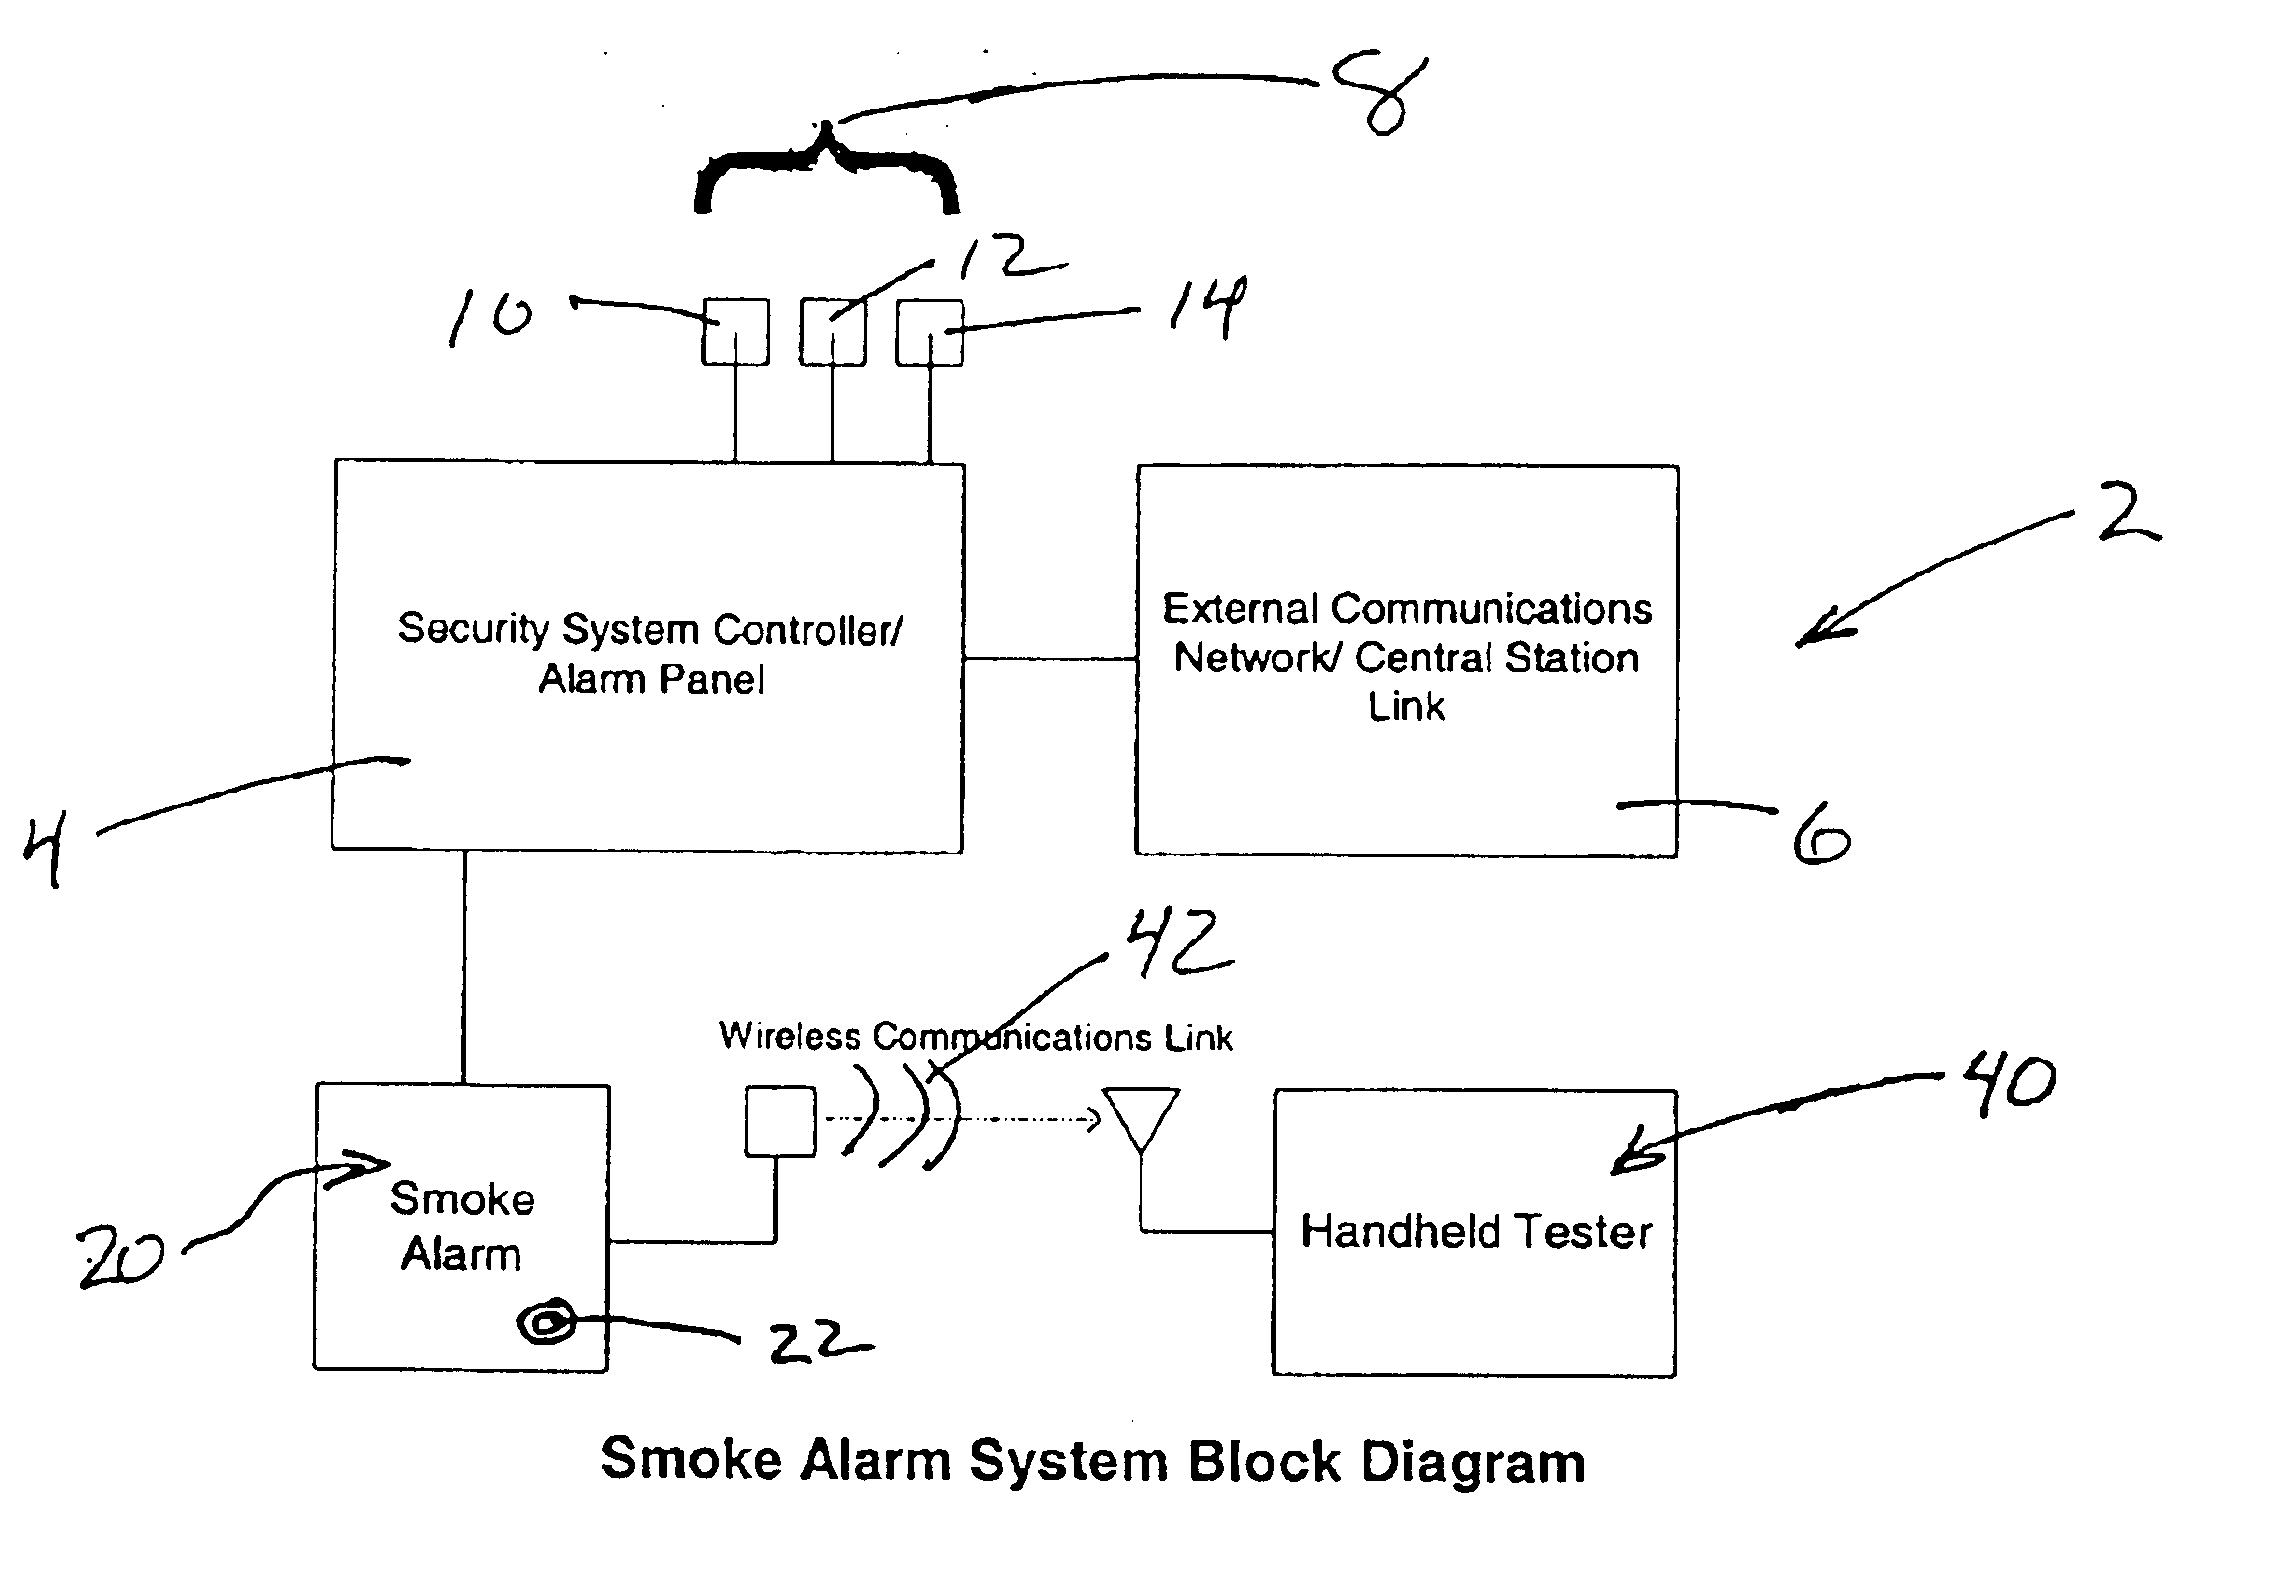 Smoke detector with performance reporting